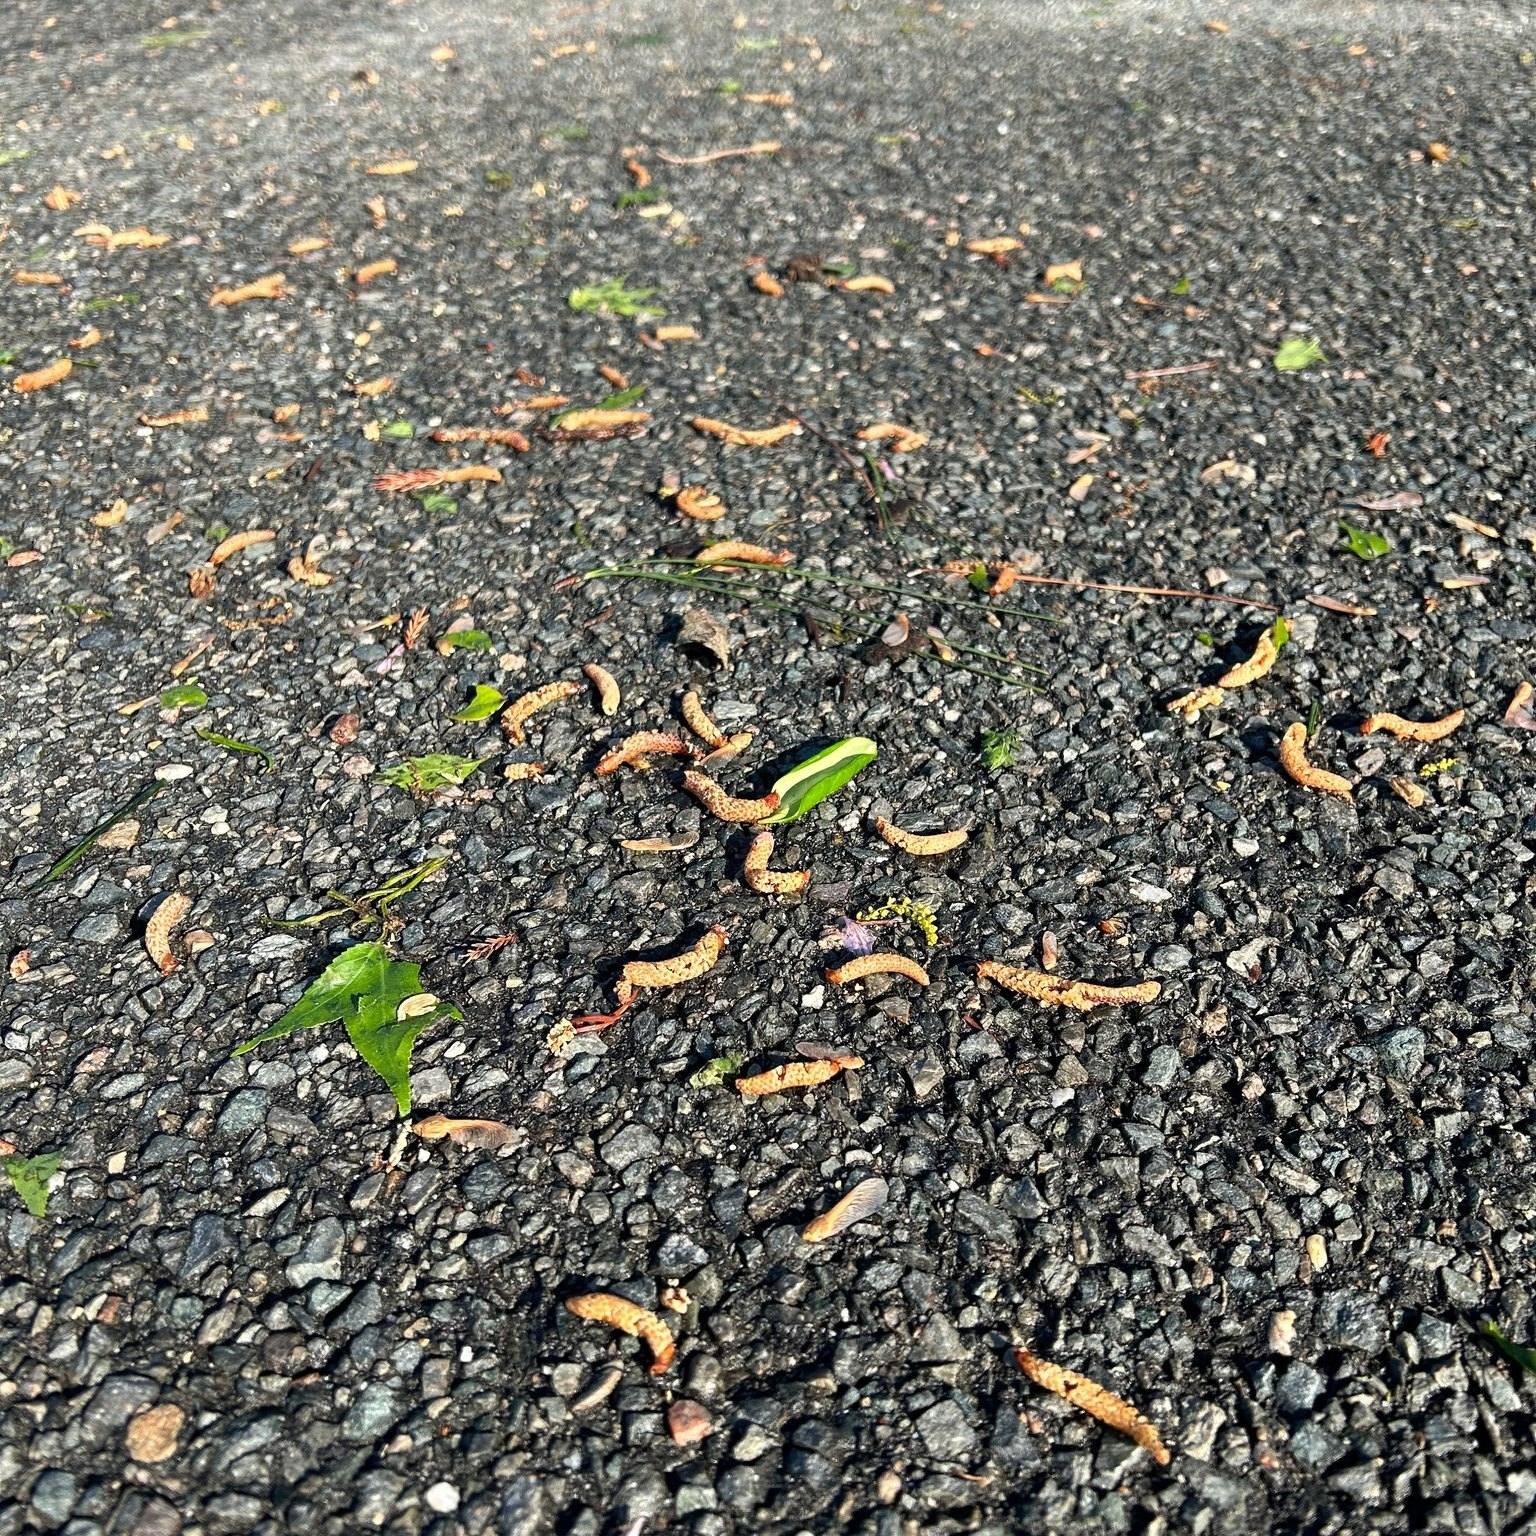 It's a lovely day in the Richmond area today, but I am sure a lot of you were hit with the heavy wind and storms we had last night.  A lot of the debris included those pesky, small wormlike pollen things from trees. If you had an influx of these land